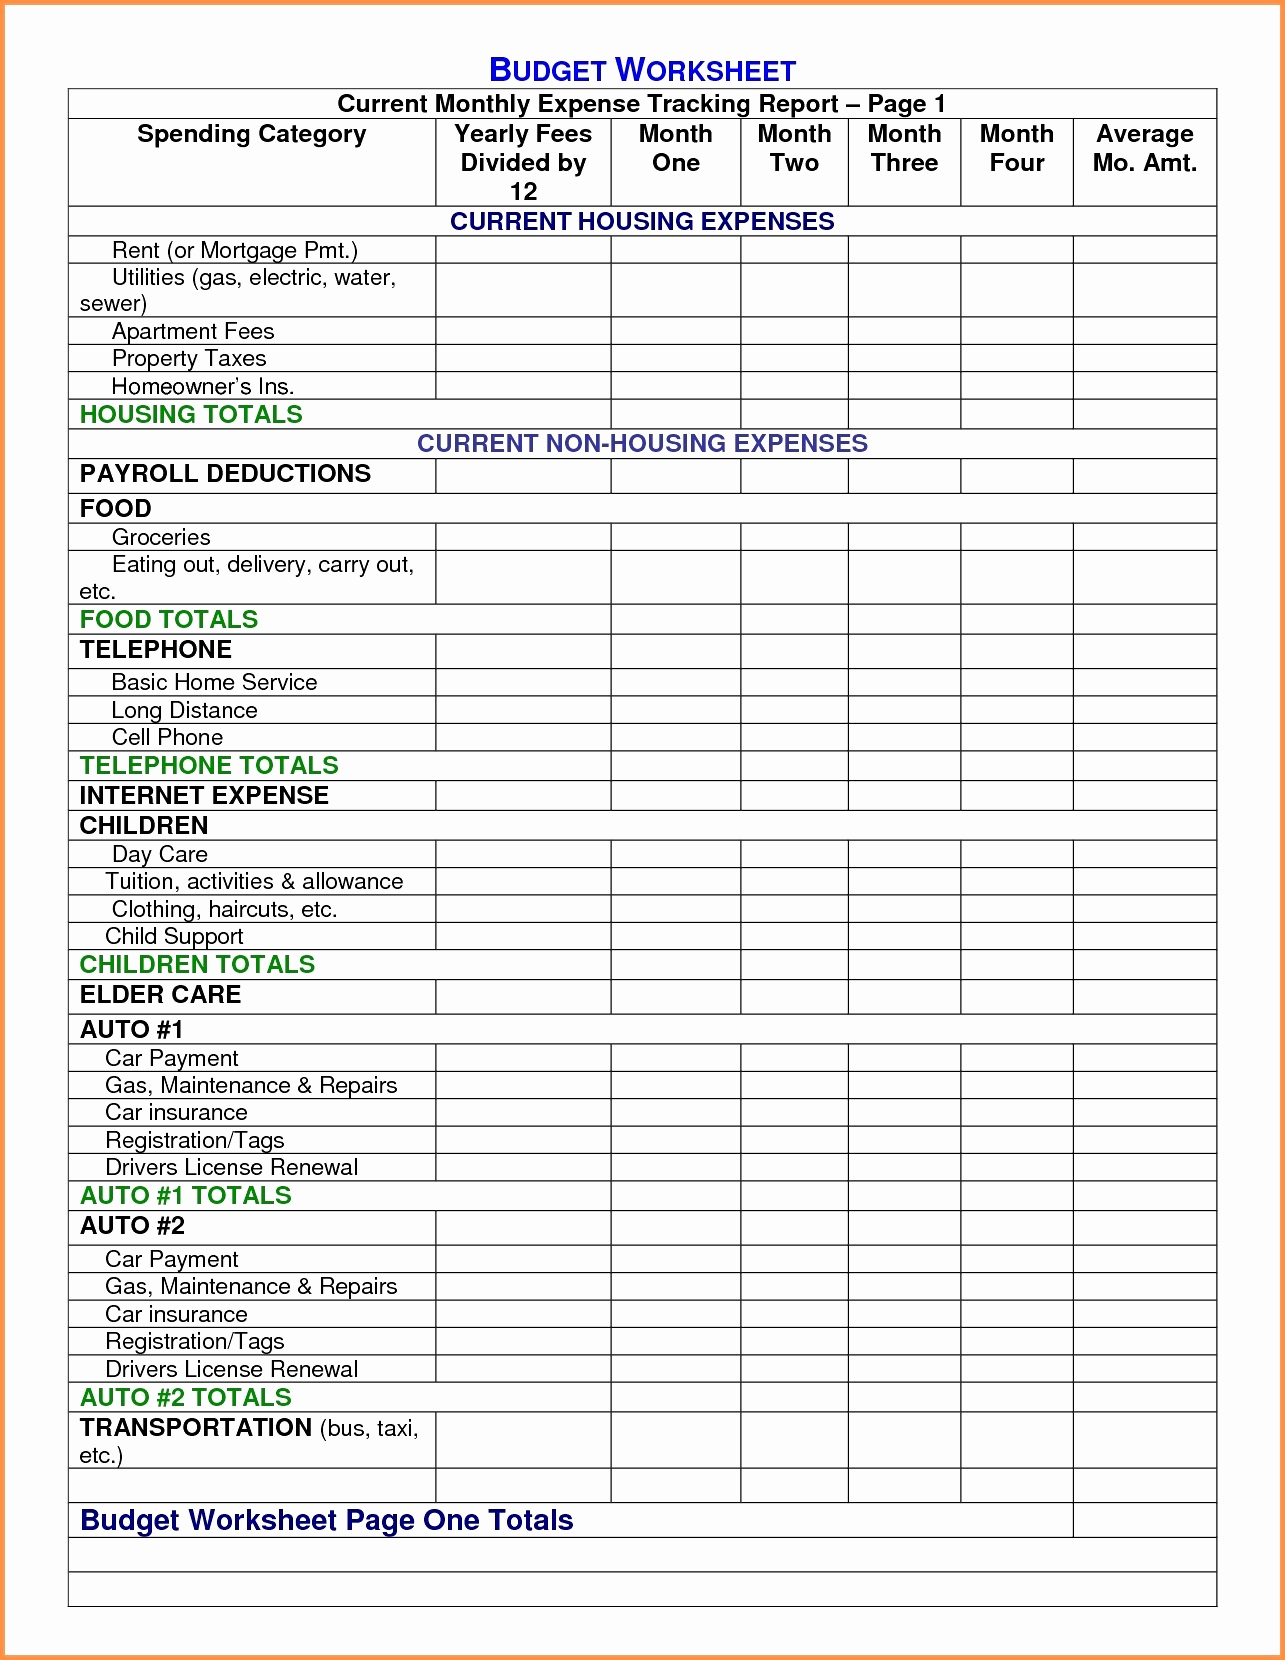 Donation Value Guide 2015 Spreadsheet Within Donation Value Guide Spreadsheet Fresh Inspirational Clothing Of